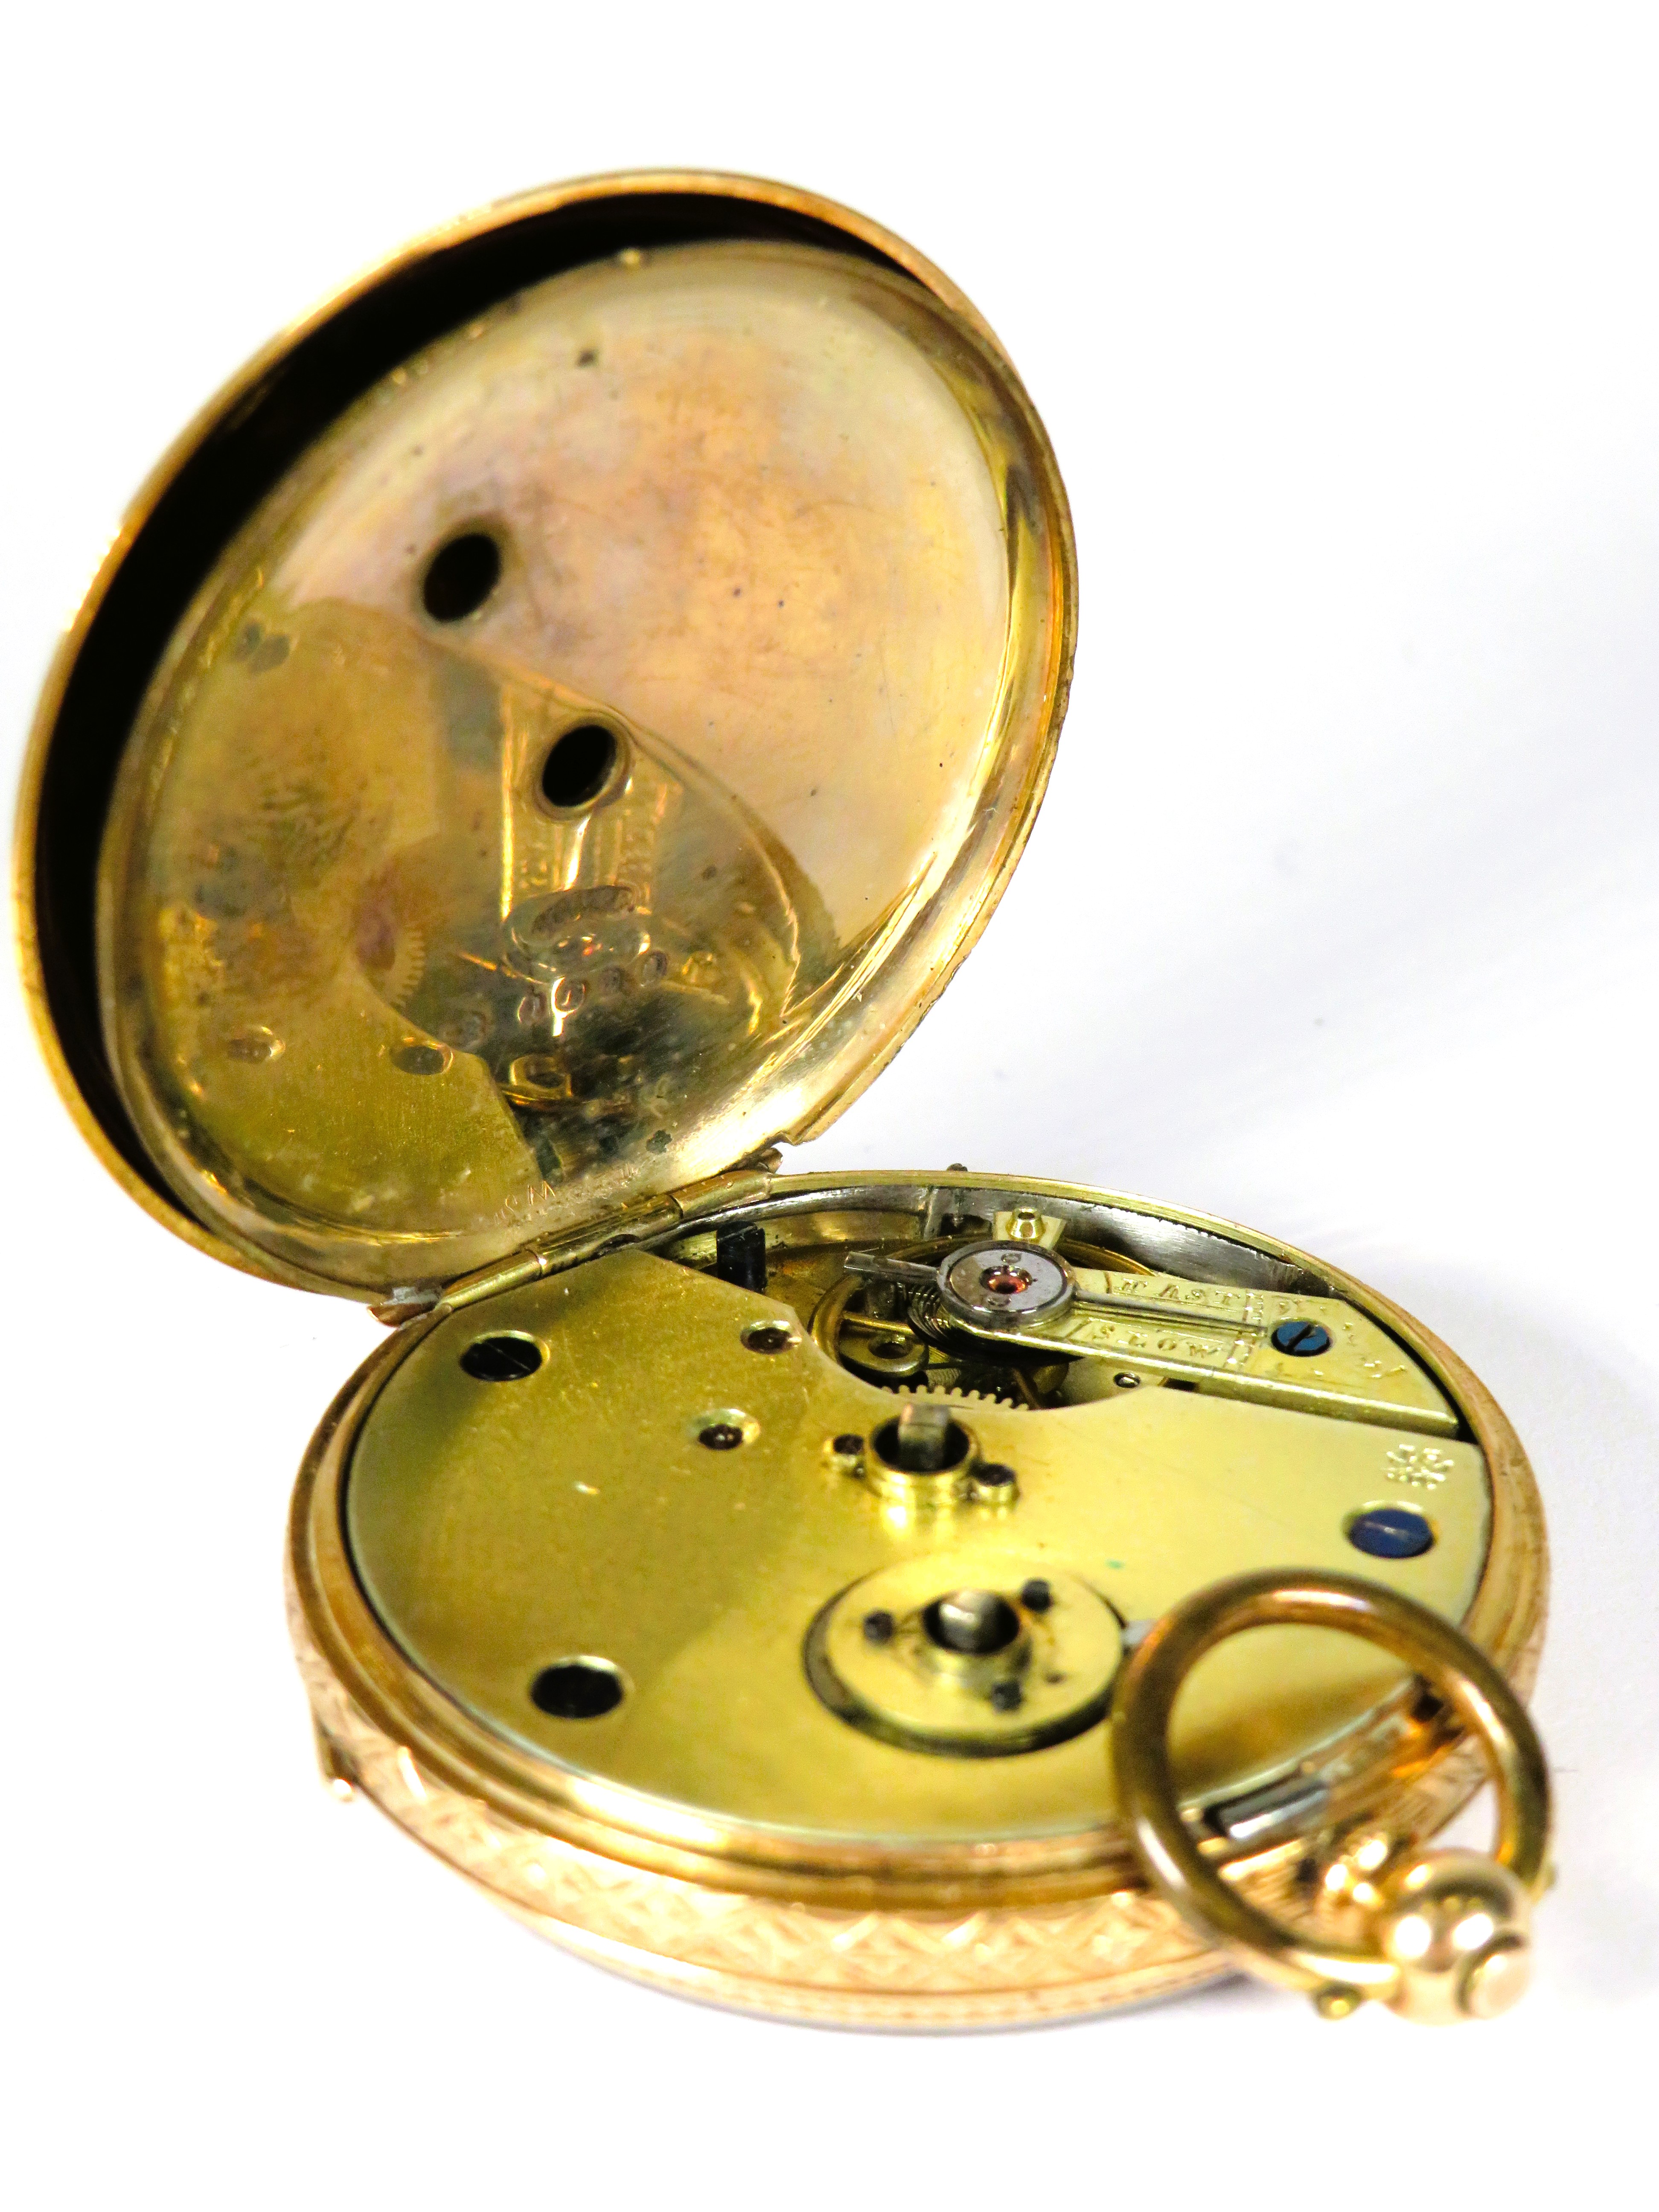 14ct Yellow Gold Bodied Pocket watch with Gold tone back and front. Comes with two keys, intermitten - Image 5 of 6